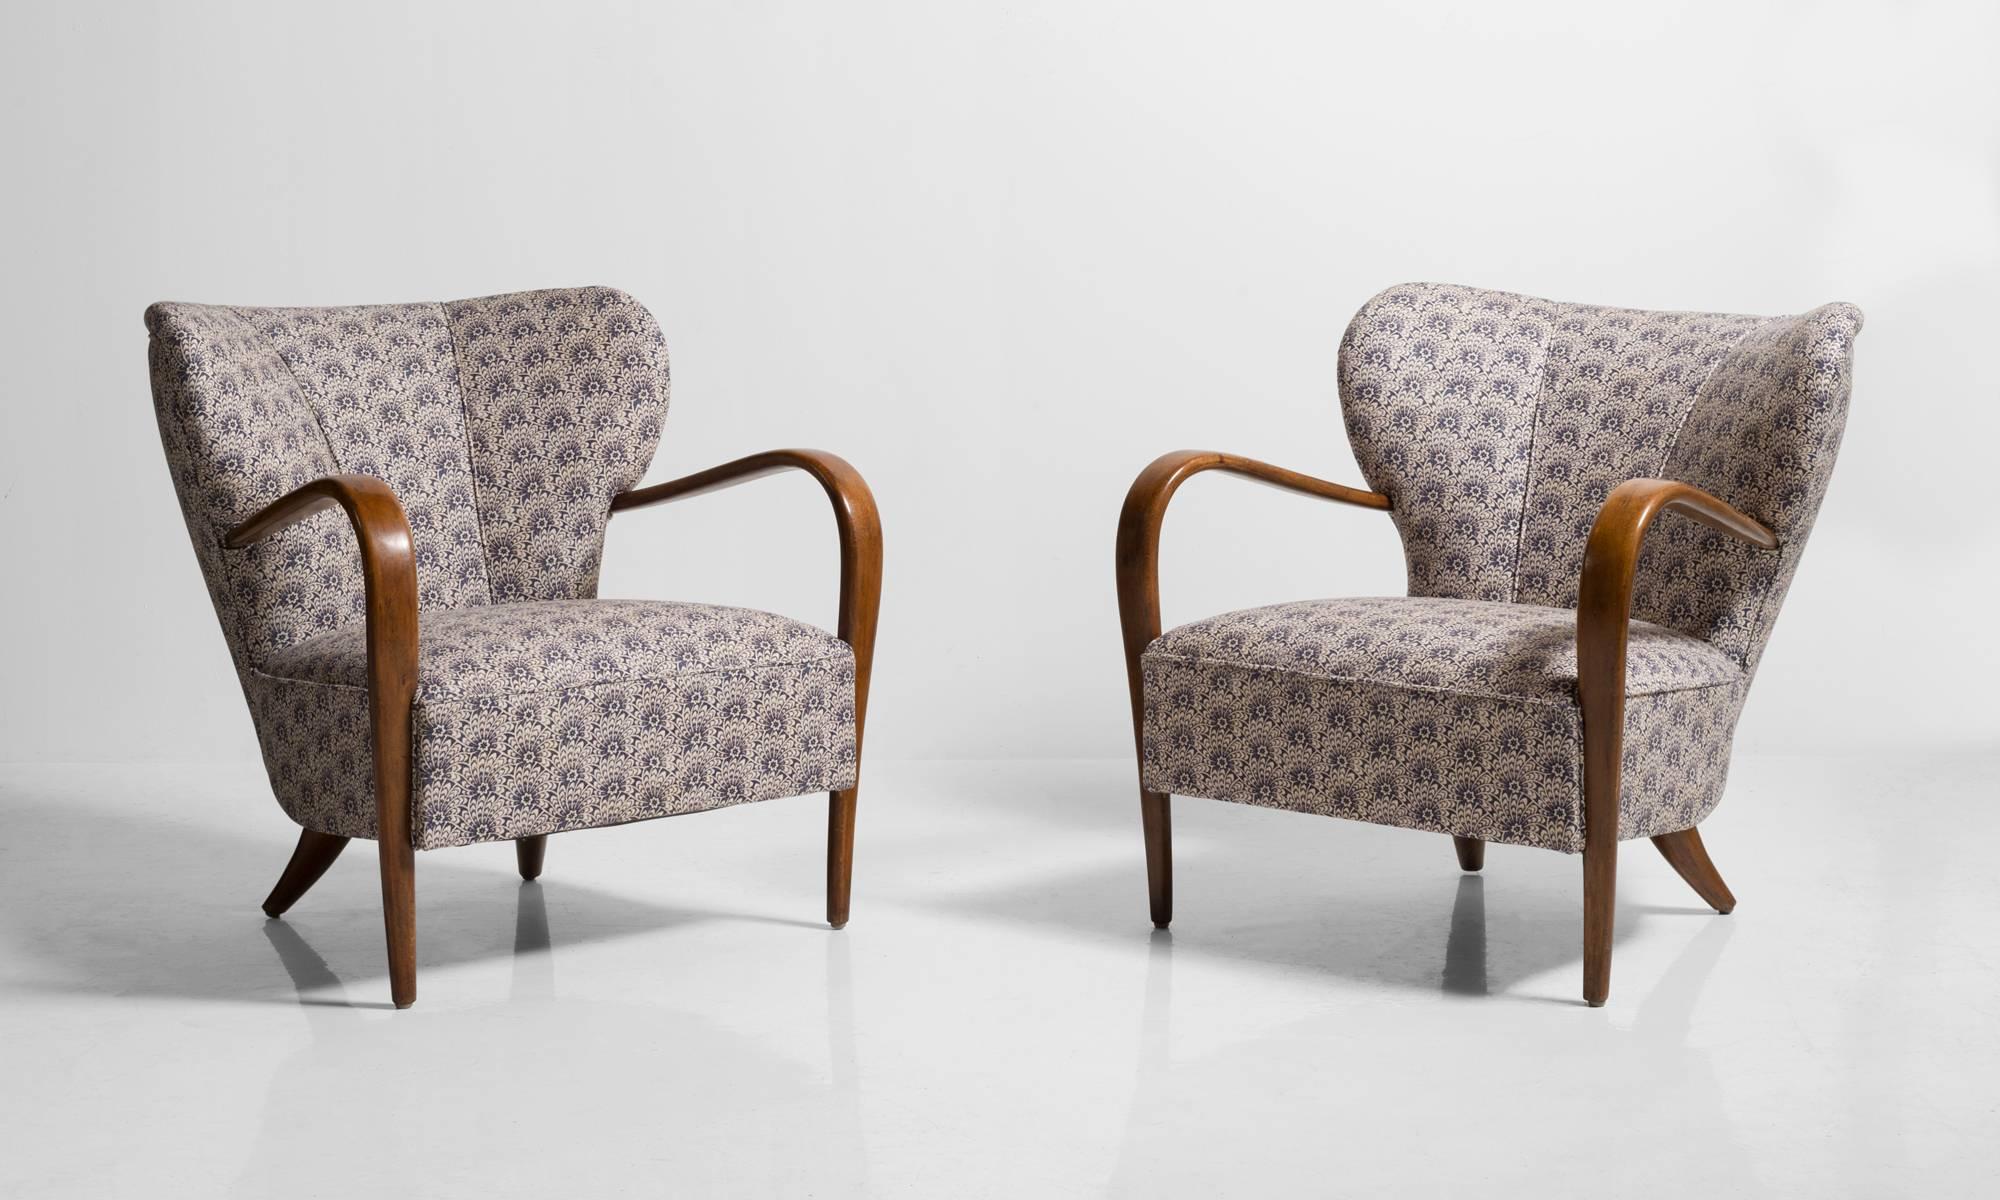 Smaller form, reupholstered in Liberty of London Archival Linen-Cotton fabric.